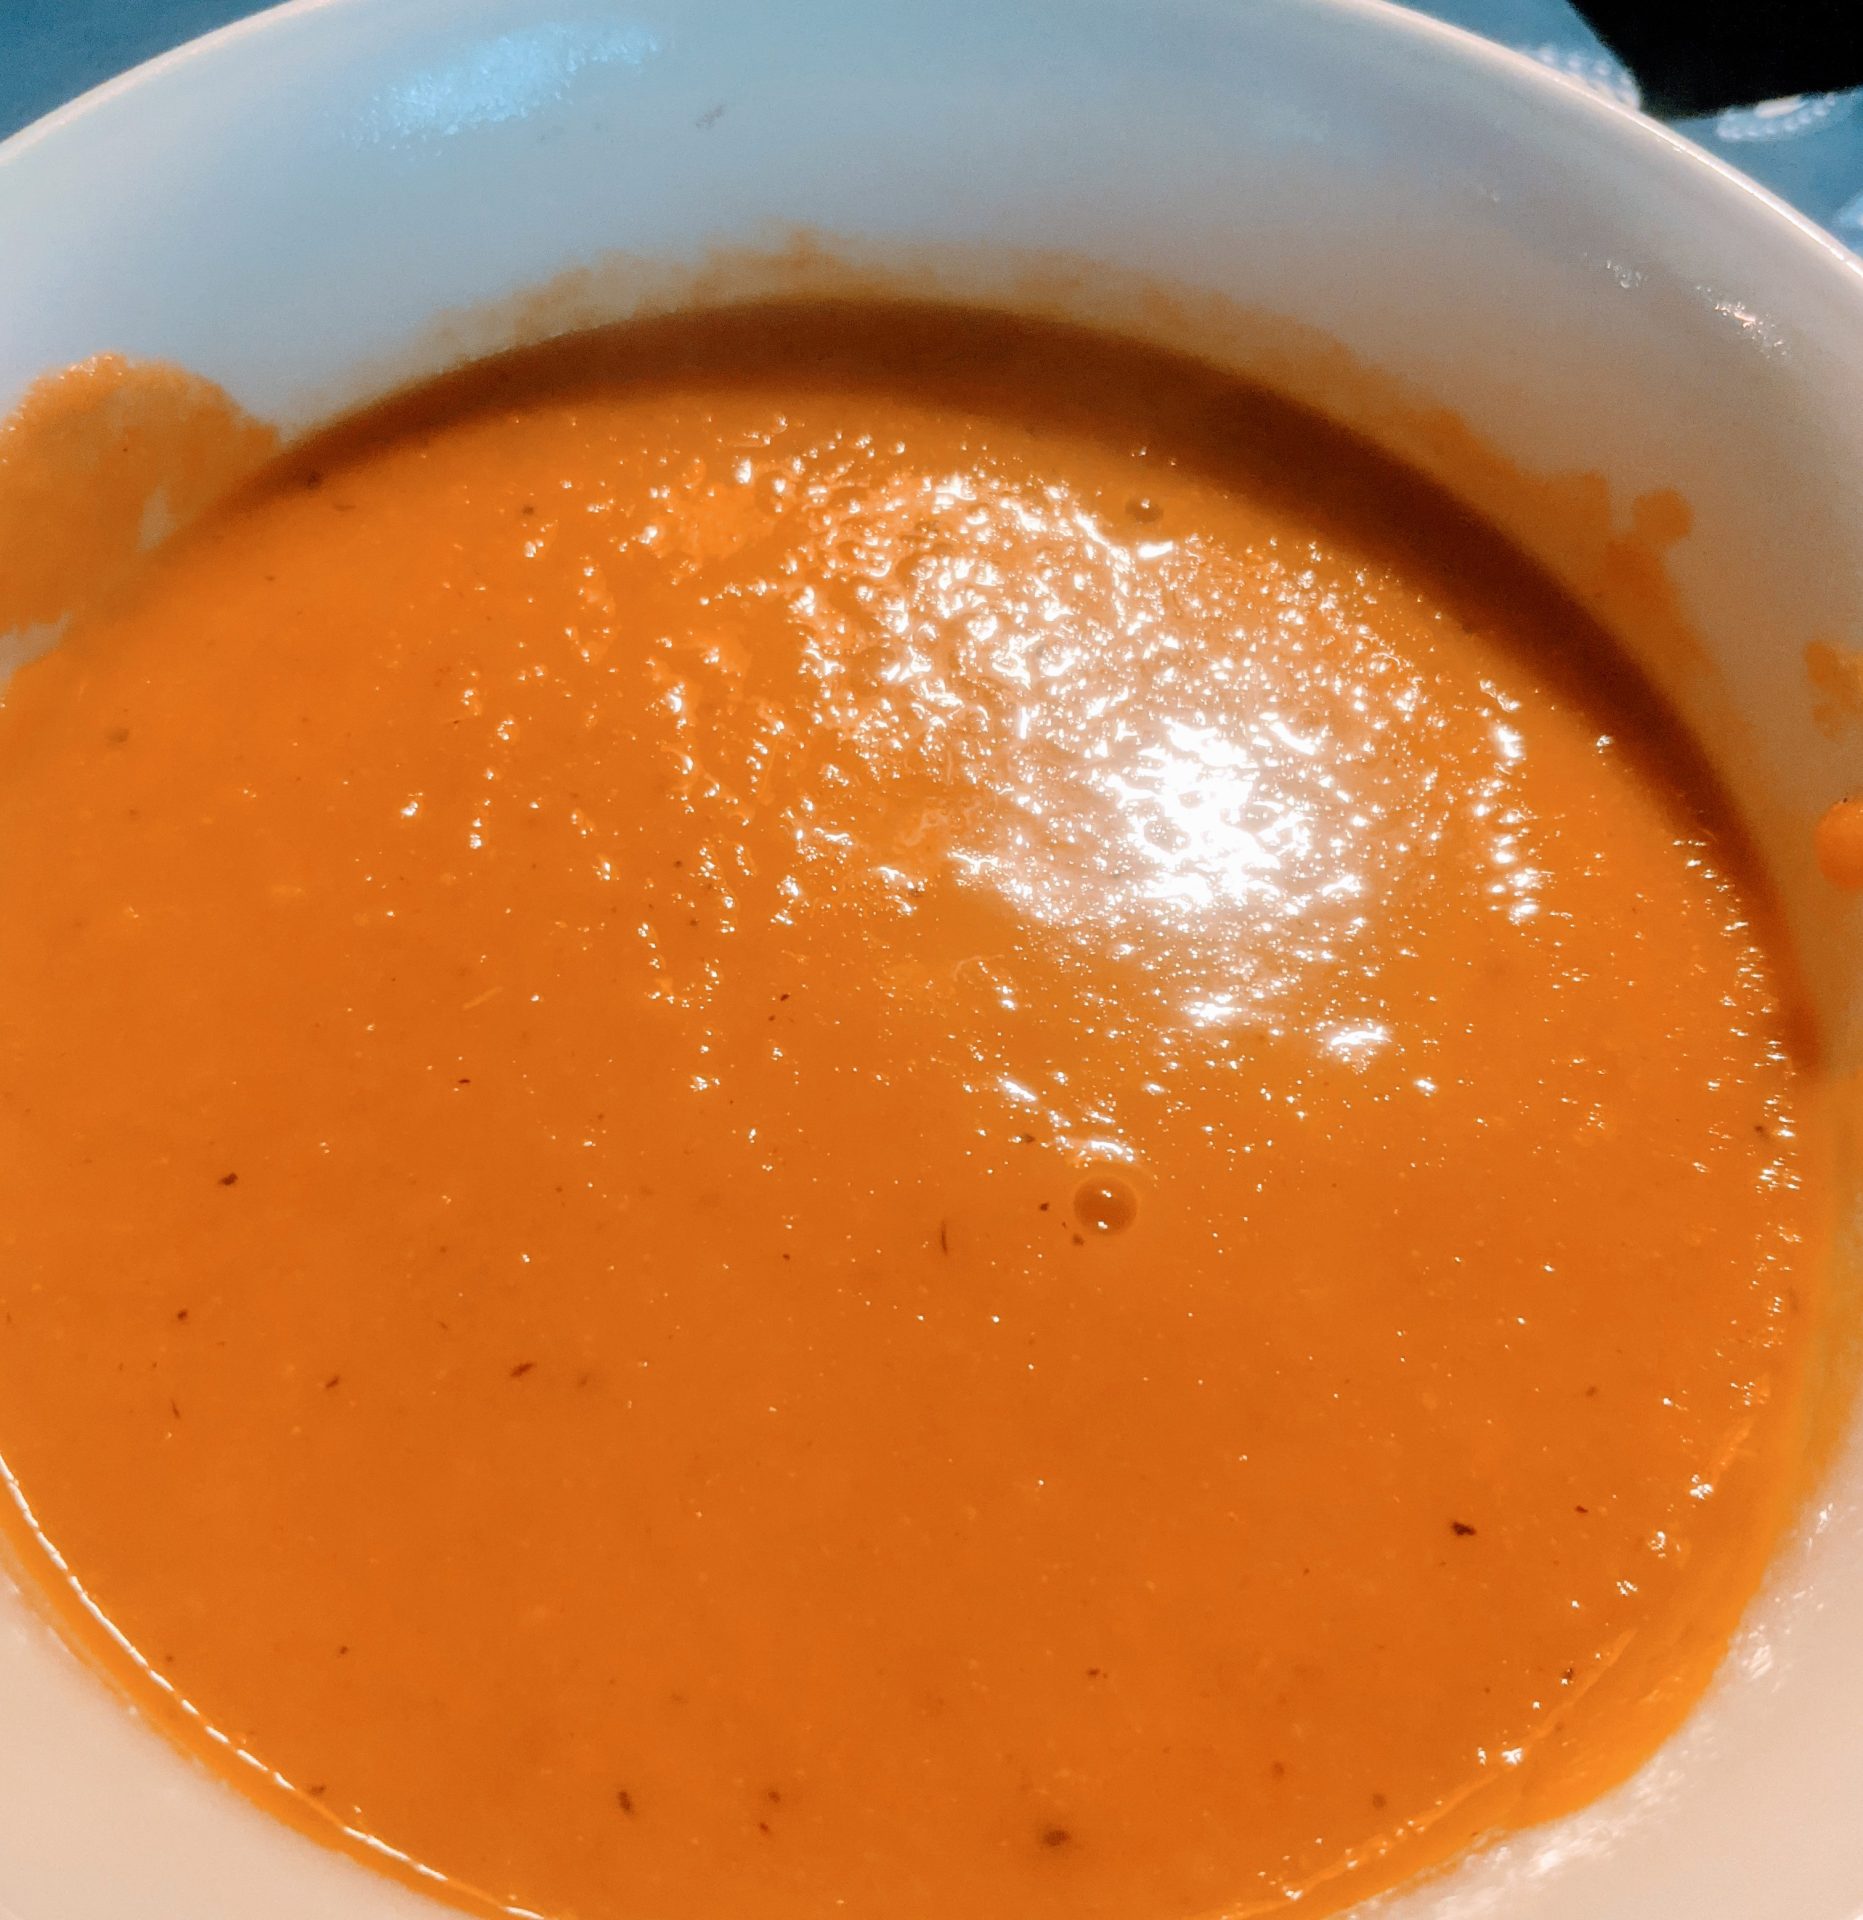 Some super delicious blended carrot soup